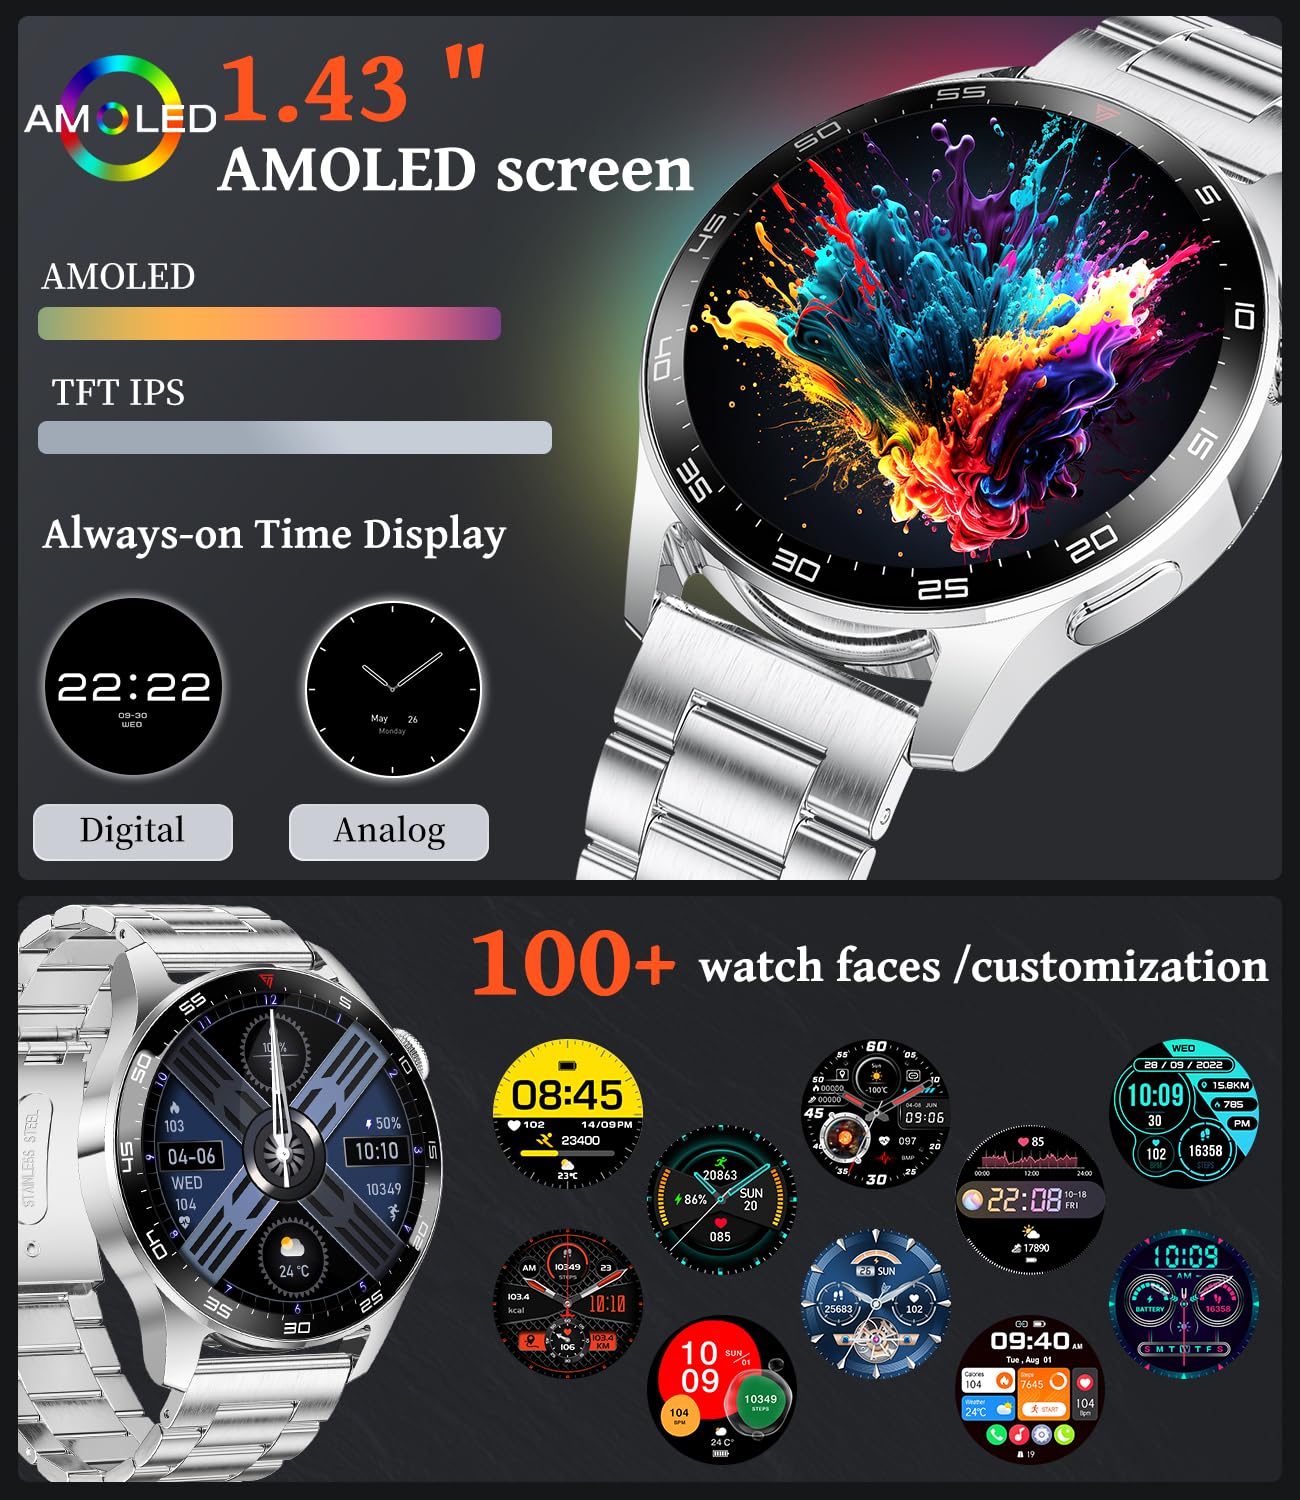 Smart Watches for Men(Answer/Dial Calls),1.43'' AMOLED Screen Fitness Tracker with SpO2/Sleep Monitor,400mAh/120 Sports Modes/ IP68 Waterproof Smartwatch for iOS Android,Sliver